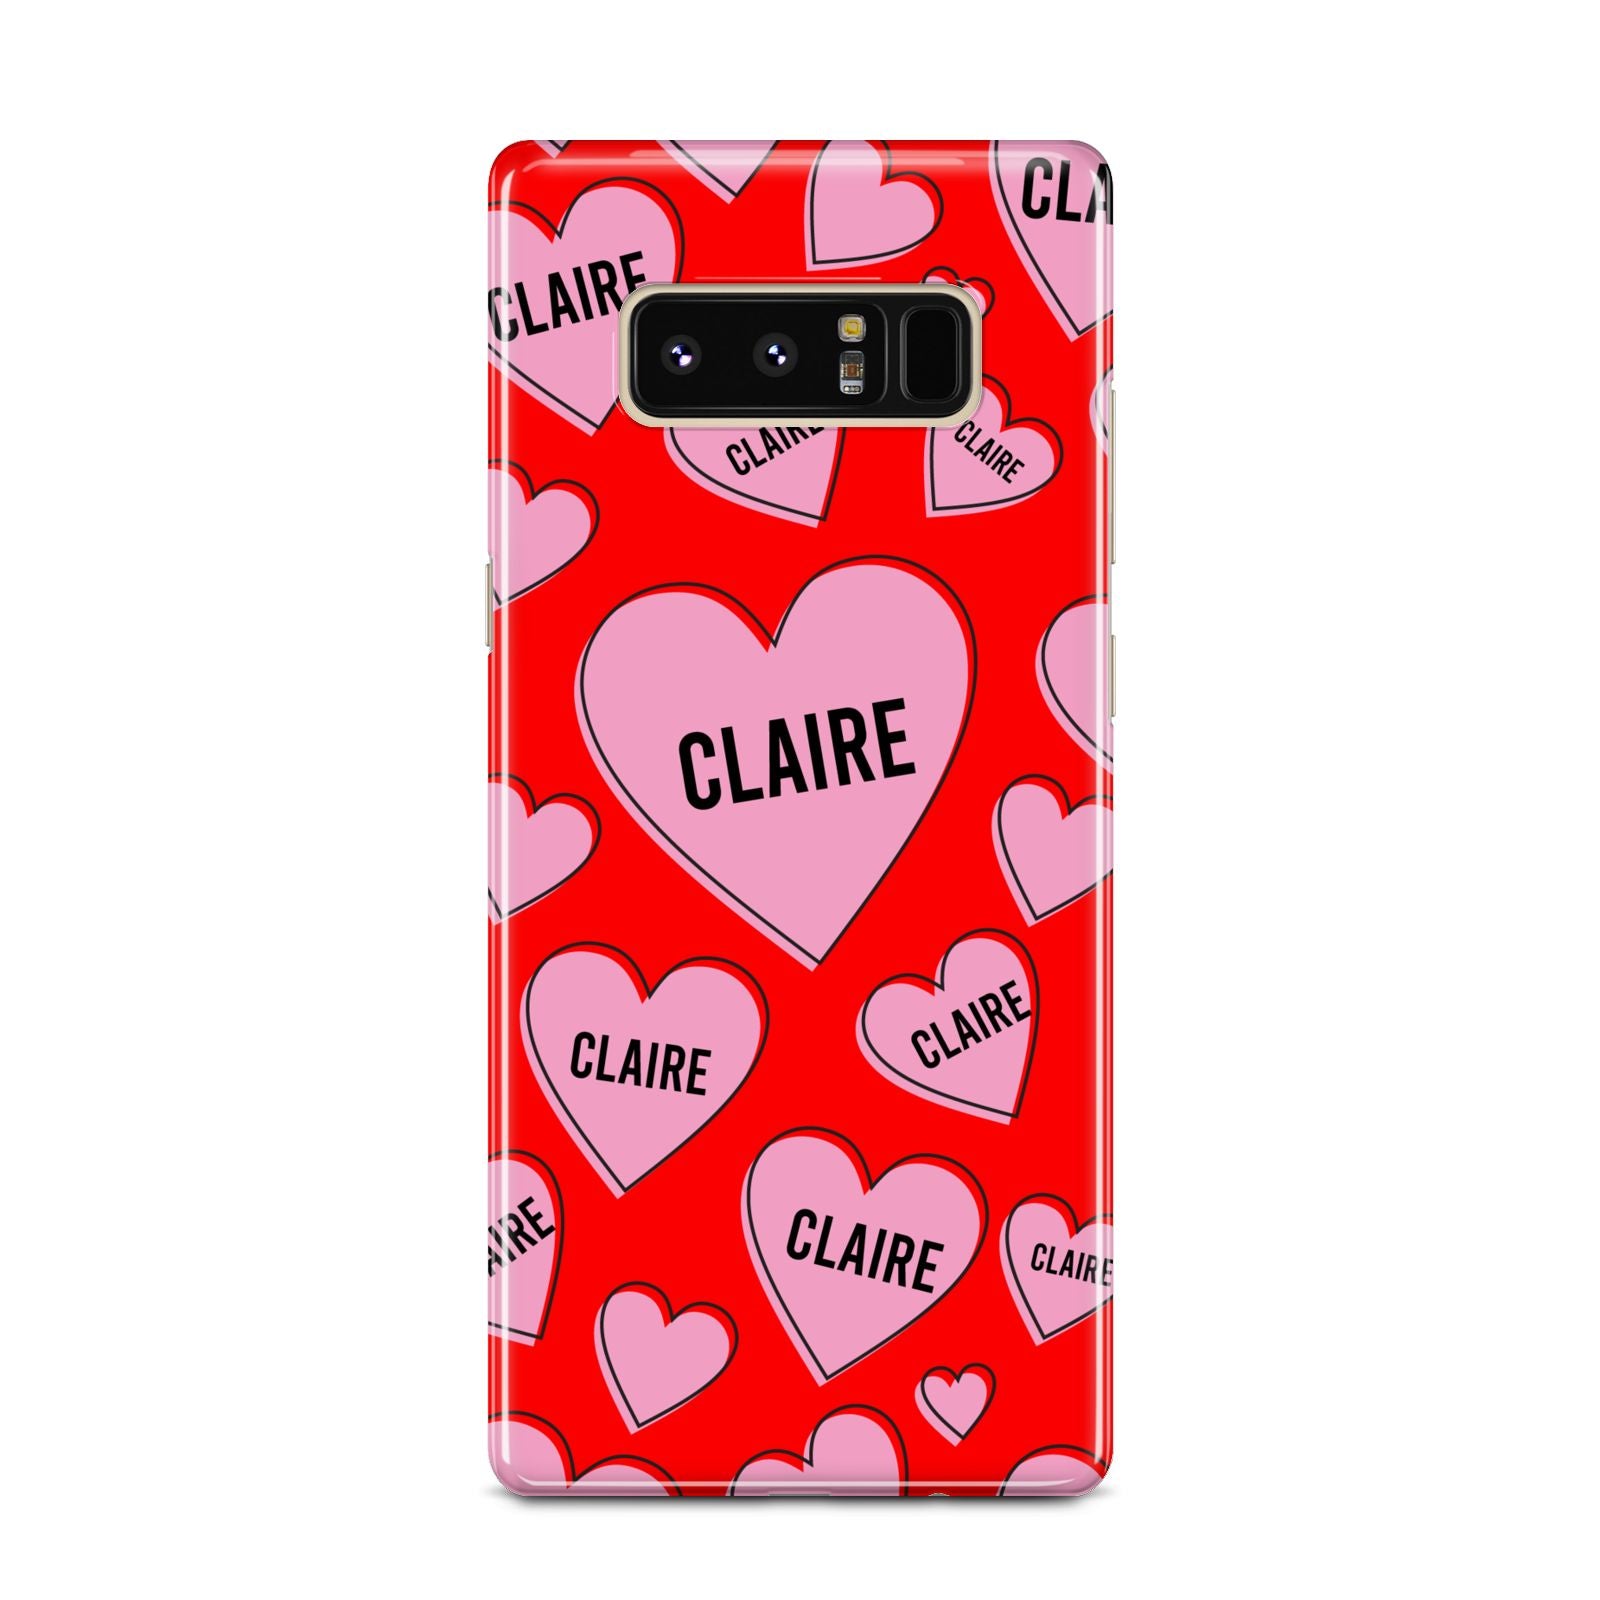 Personalised Hearts Samsung Galaxy Note 8 Case